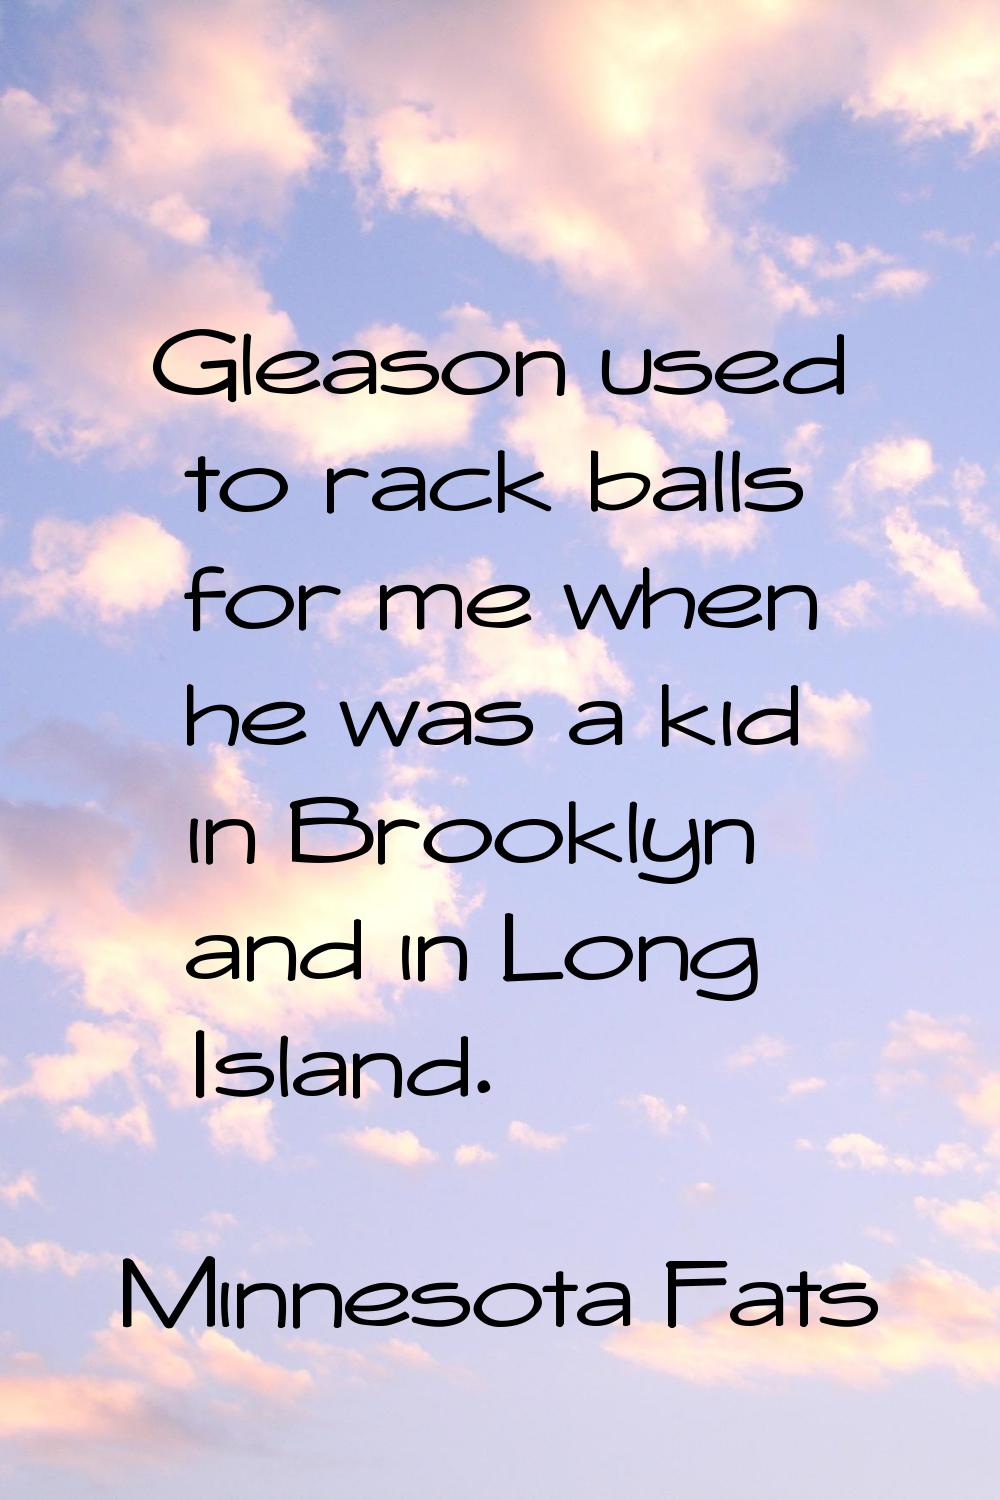 Gleason used to rack balls for me when he was a kid in Brooklyn and in Long Island.